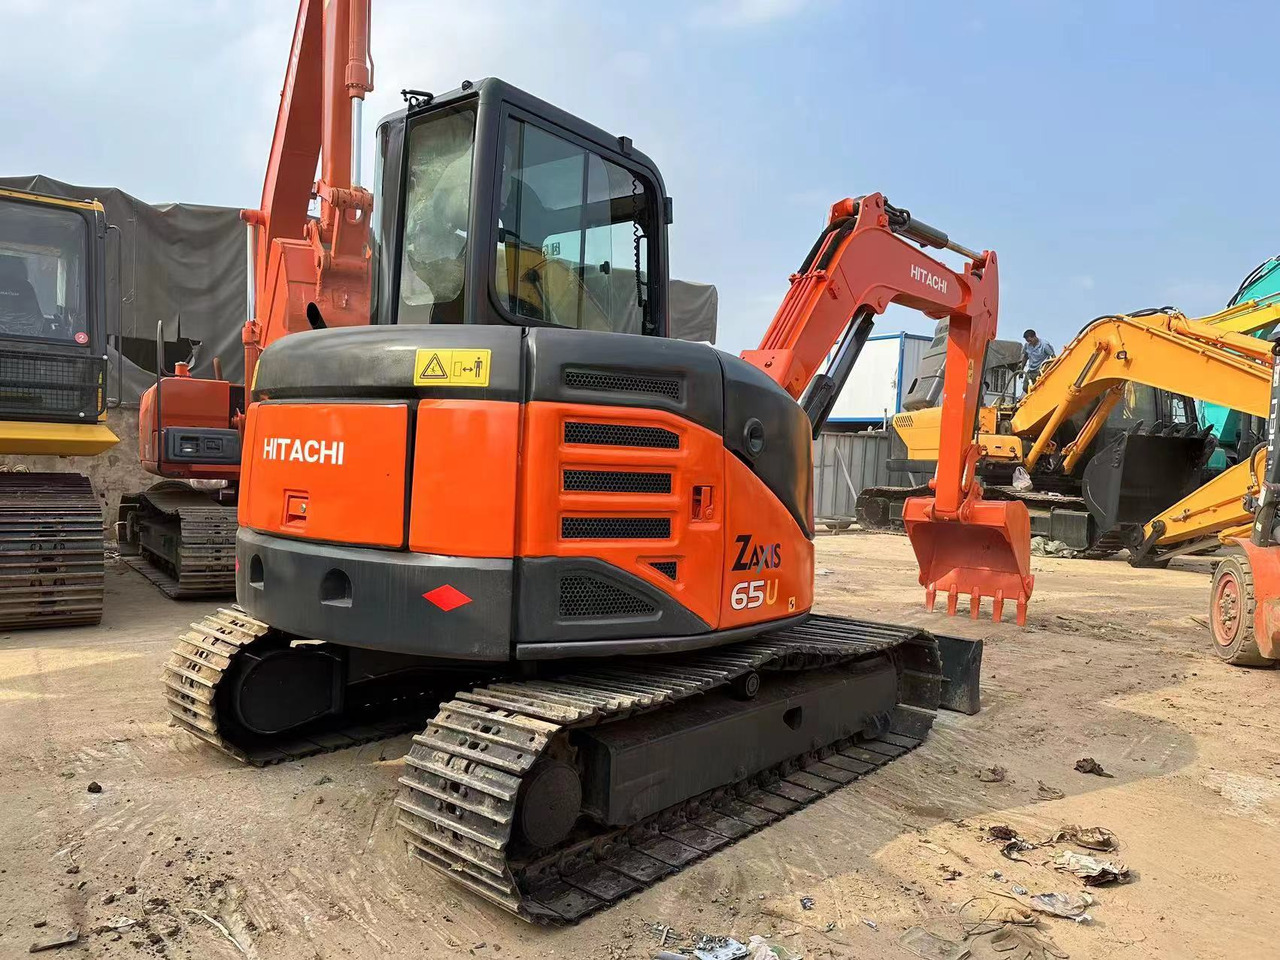 Mini pelle Good Performance Used excavator Hitachi ZX65U good condition low price on sale welcome to inquire: photos 2